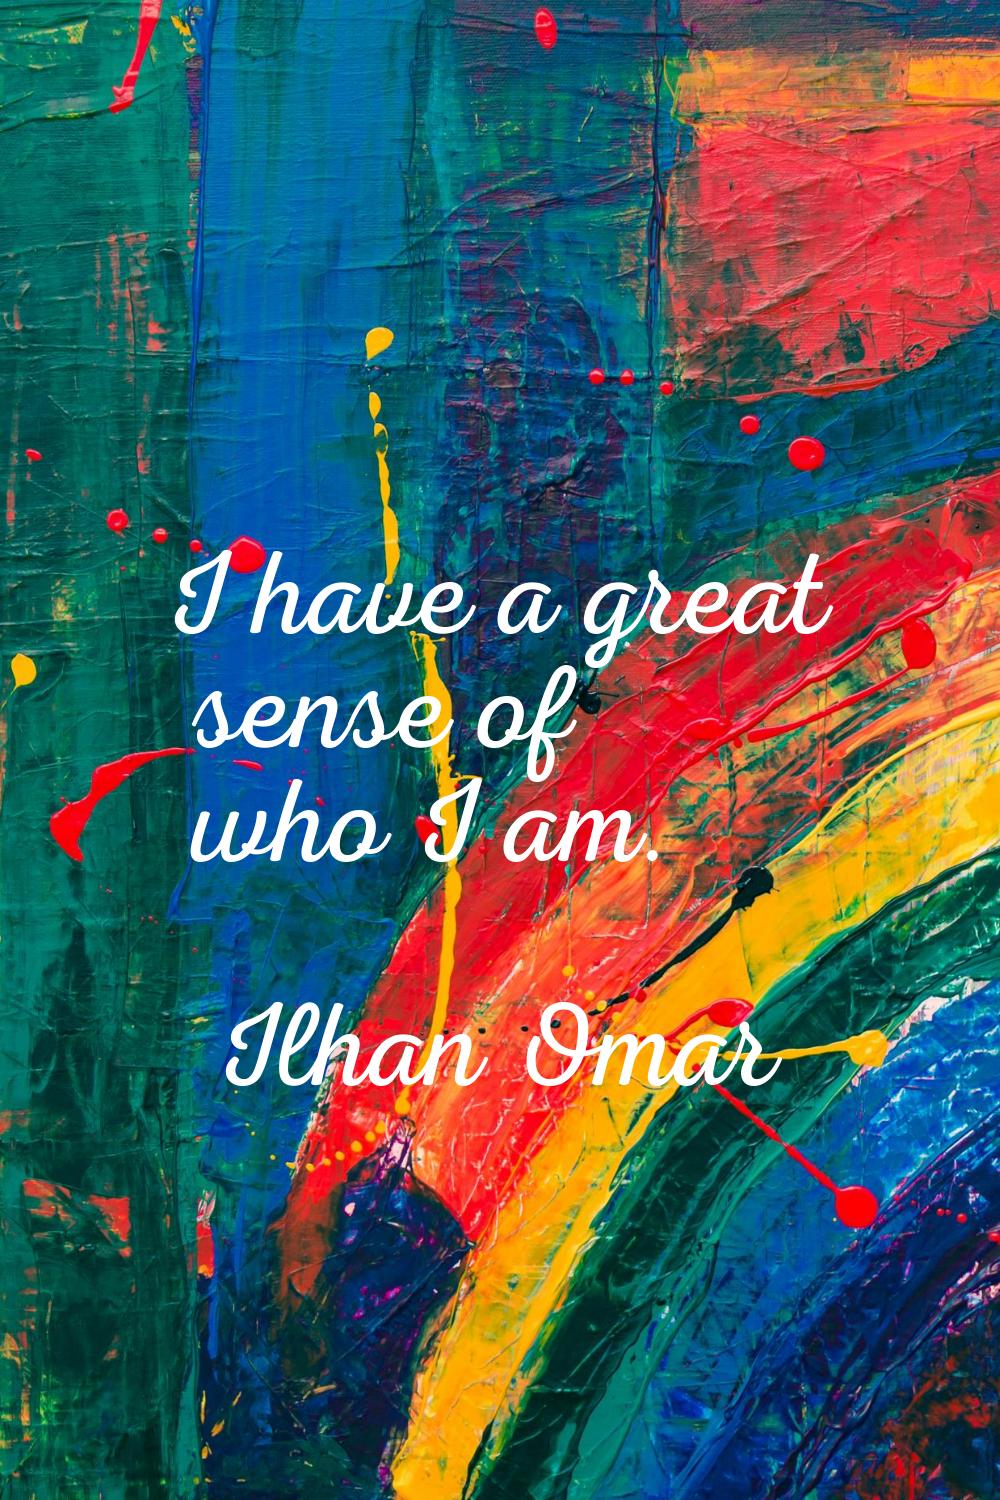 I have a great sense of who I am.